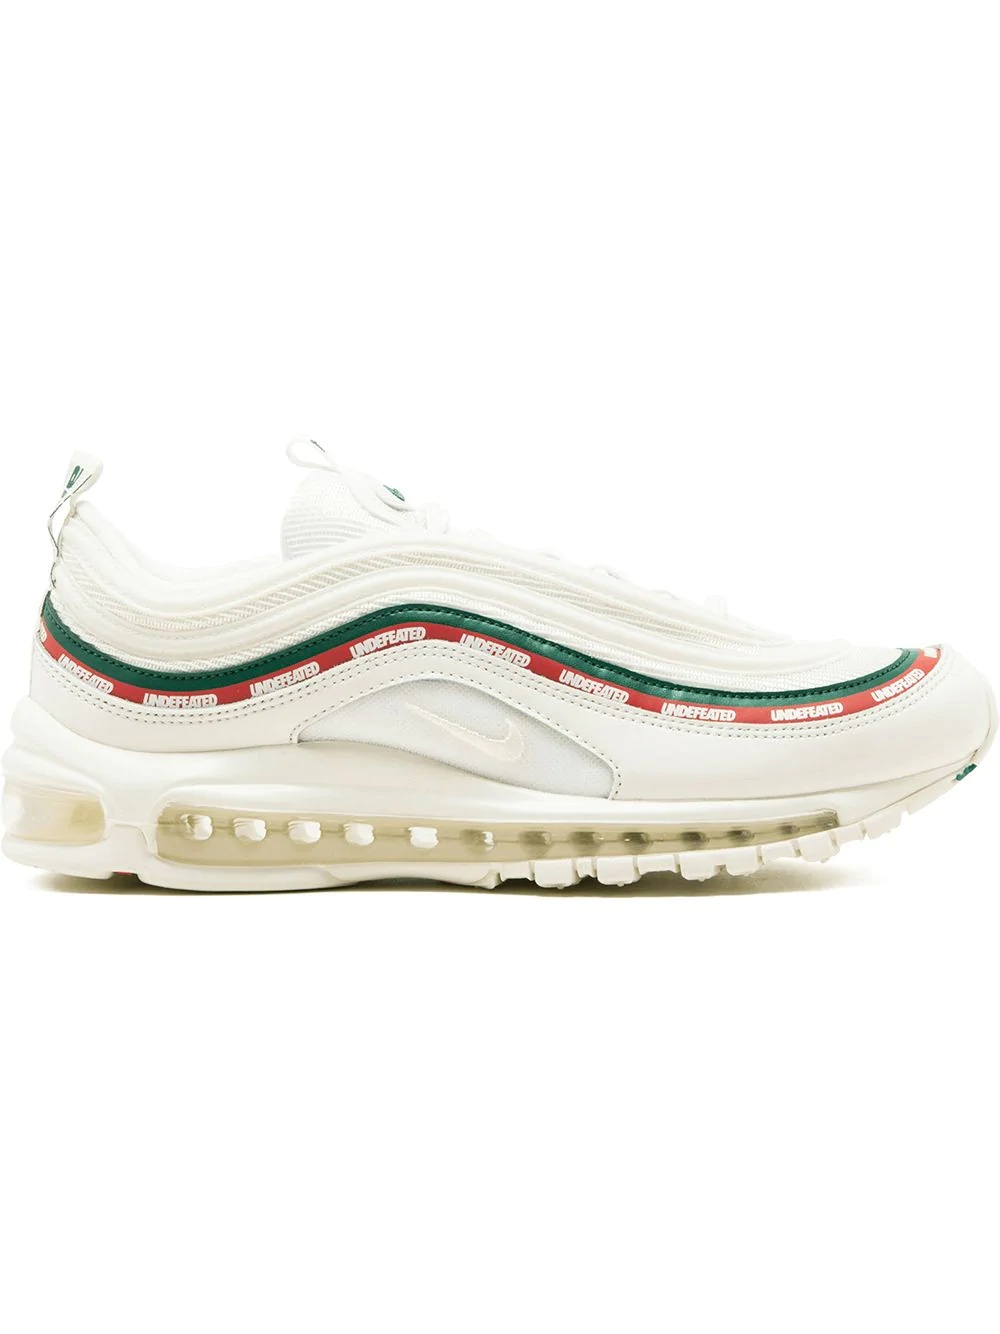 x Undefeated Air Max 97 OG "White" sneakers - 1